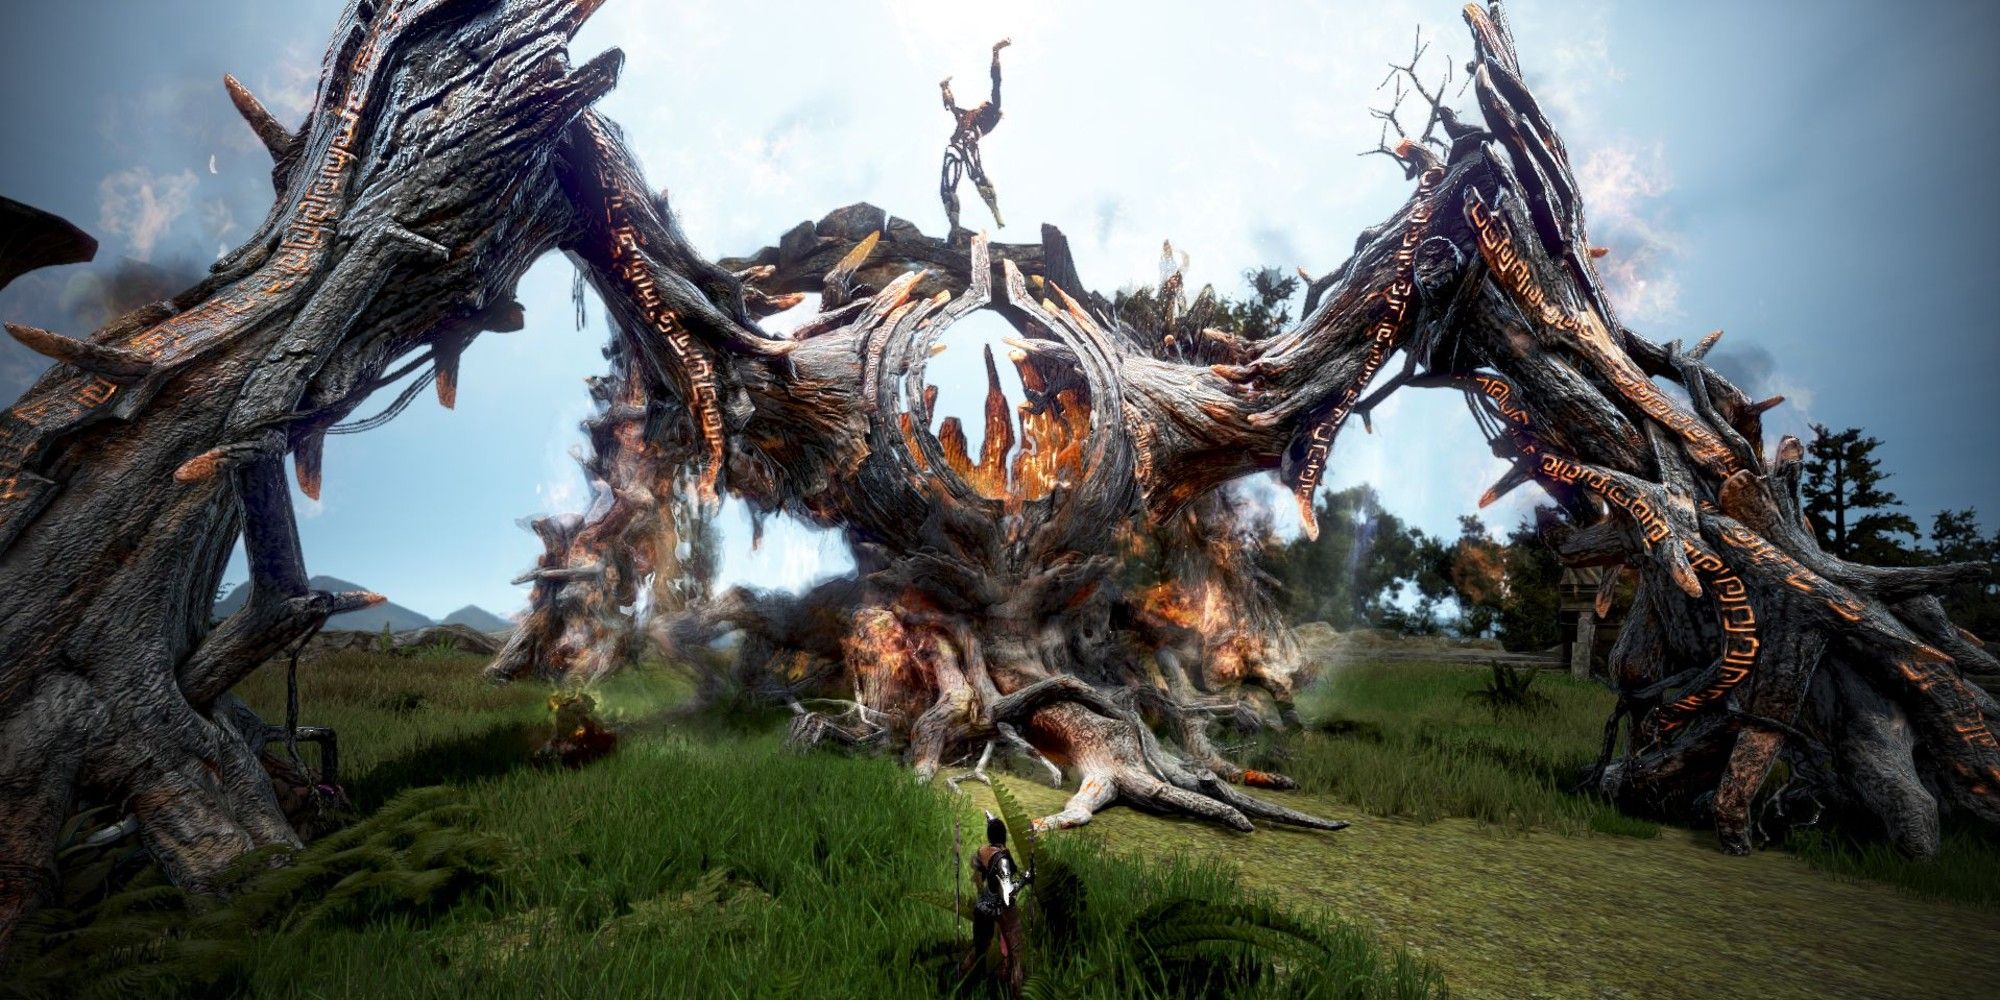 Facing off against a burning tree monster